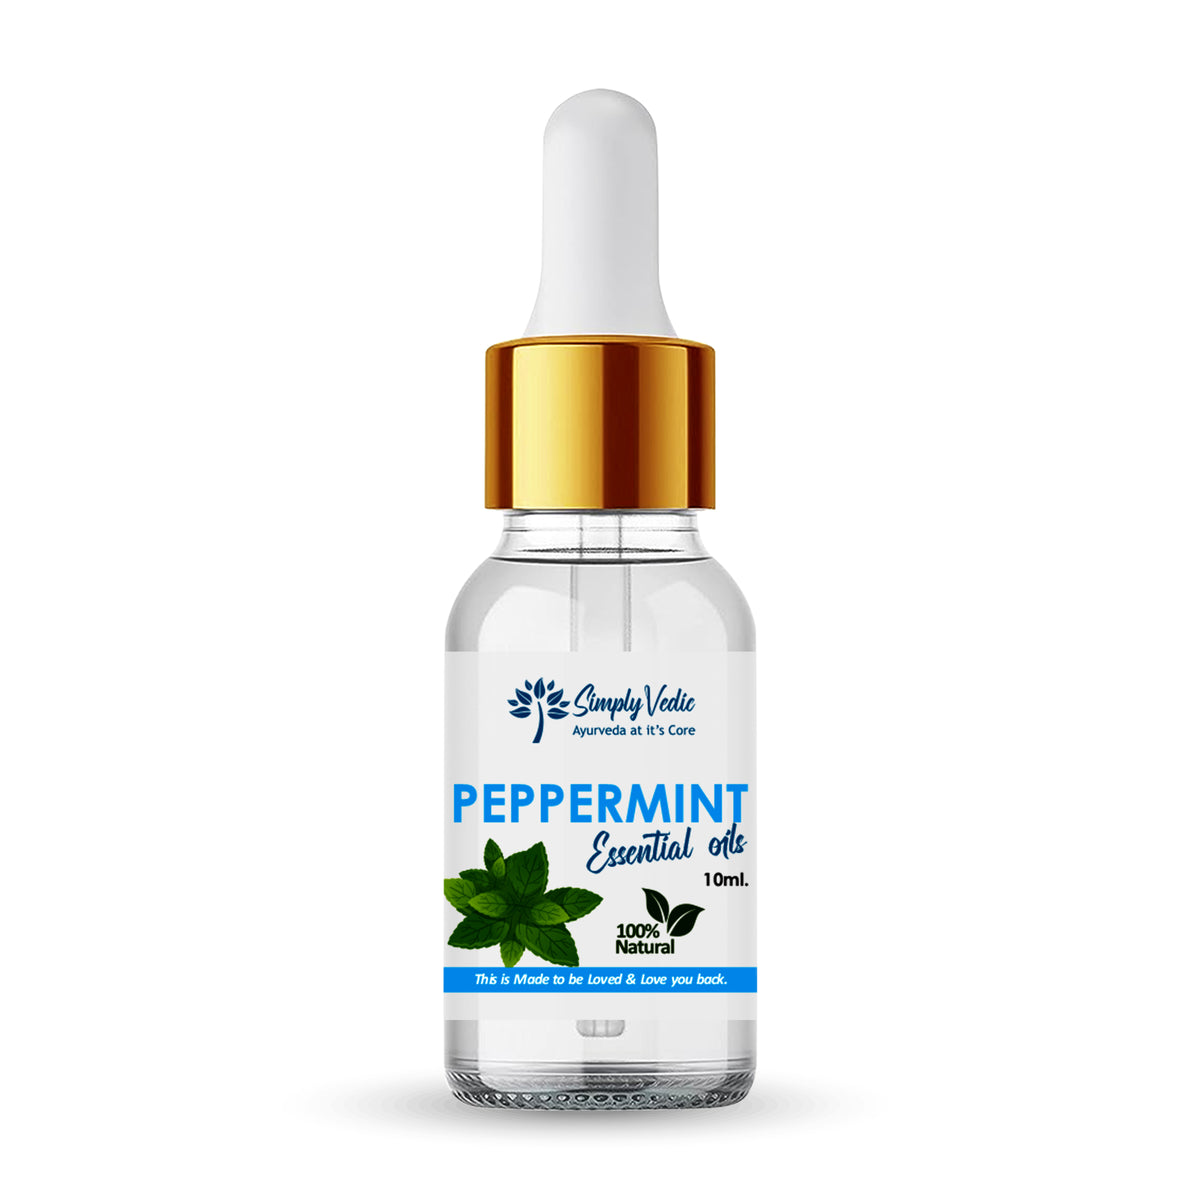 Simply Vedic Peppermint Essential Oil